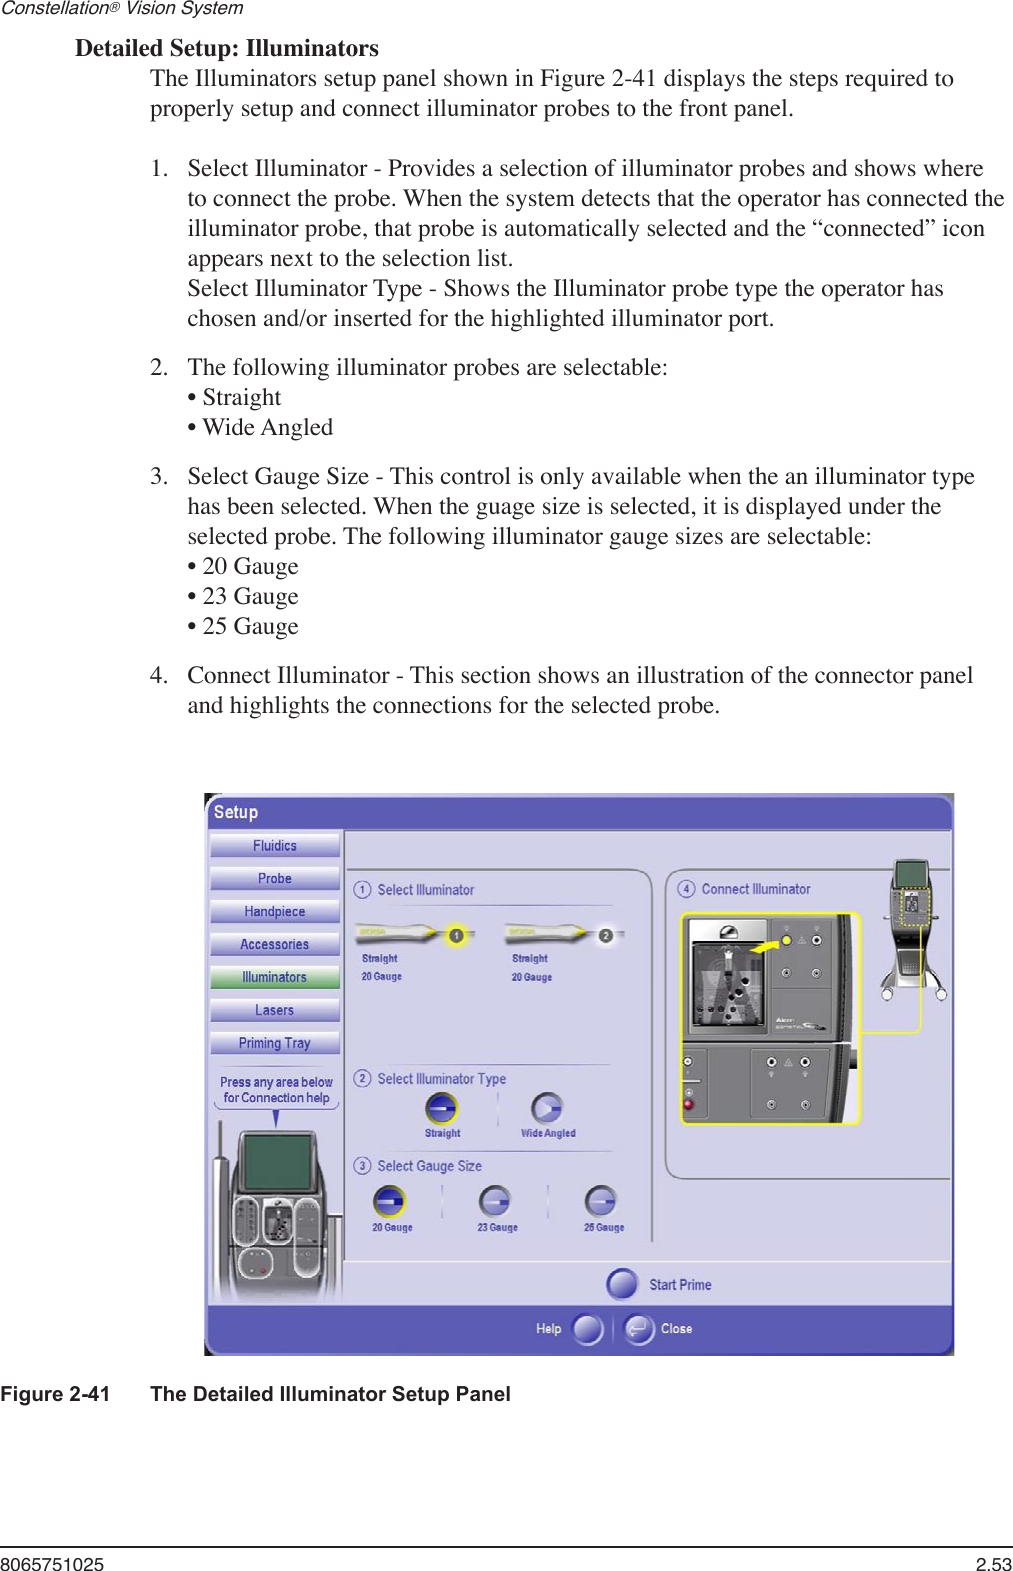 8065751025  2.53Constellation® Vision System Detailed Setup: IlluminatorsThe Illuminators setup panel shown in Figure 2-41 displays the steps required to properly setup and connect illuminator probes to the front panel.Select Illuminator - Provides a selection of illuminator probes and shows where to connect the probe. When the system detects that the operator has connected the illuminator probe, that probe is automatically selected and the “connected” icon appears next to the selection list. Select Illuminator Type - Shows the Illuminator probe type the operator has chosen and/or inserted for the highlighted illuminator port.The following illuminator probes are selectable: • Straight         • Wide Angled  Select Gauge Size - This control is only available when the an illuminator type has been selected. When the guage size is selected, it is displayed under the selected probe. The following illuminator gauge sizes are selectable: • 20 Gauge   • 23 Gauge   • 25 Gauge  Connect Illuminator - This section shows an illustration of the connector panel and highlights the connections for the selected probe.1.2.3.4.Figure 2-41  The Detailed Illuminator Setup Panel